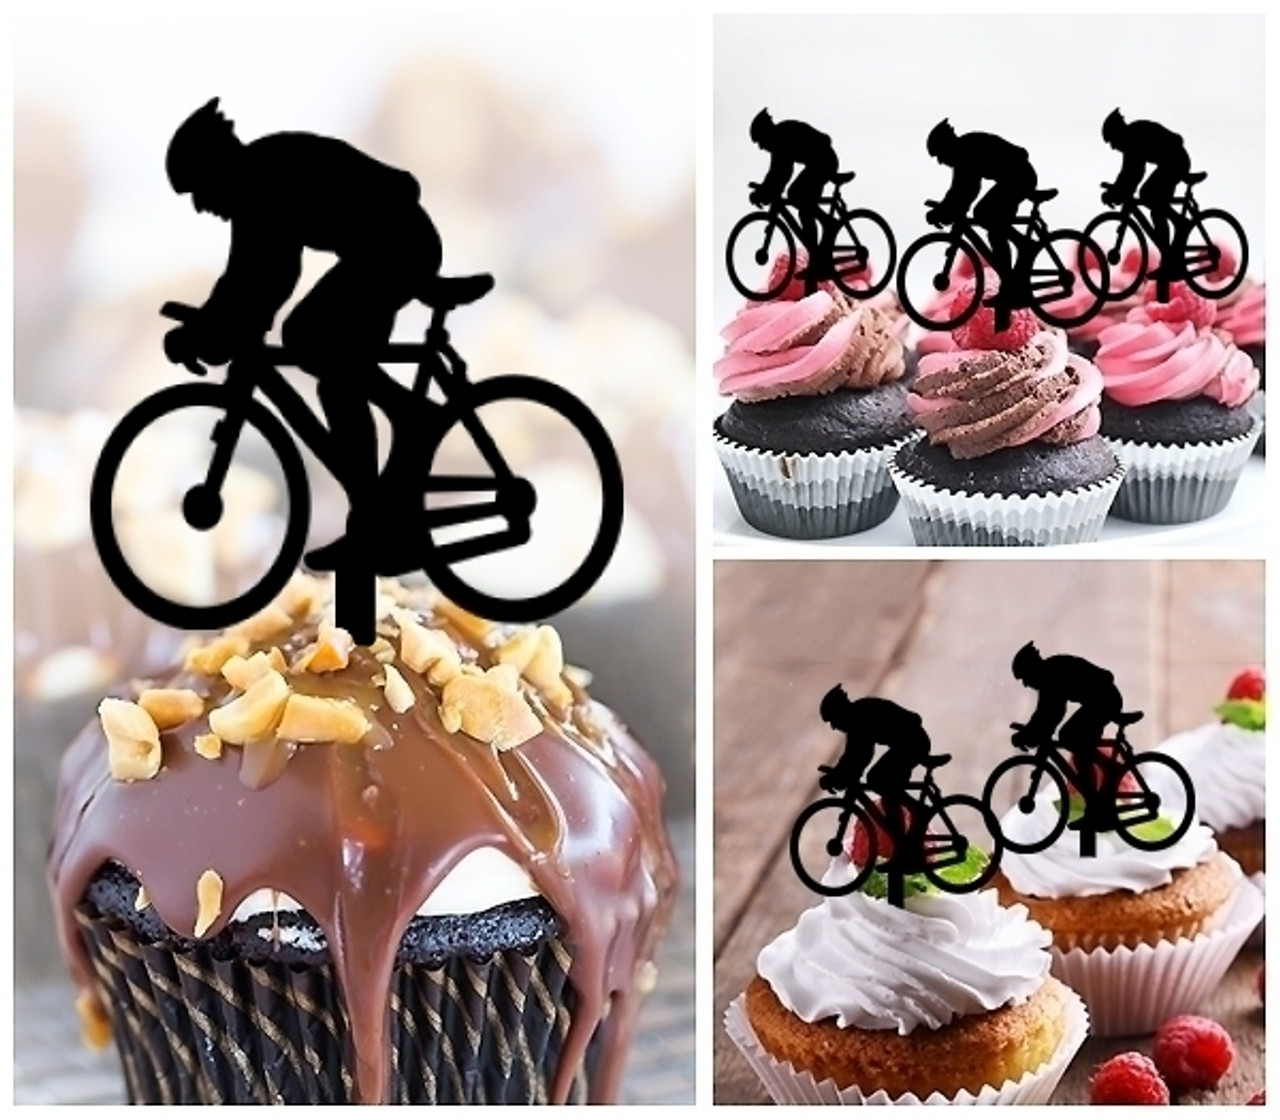 Ta0067 Bicycle Sport Silhouette Party Wedding Birthday Acrylic Cupcake Toppers Decor 10 Pcs